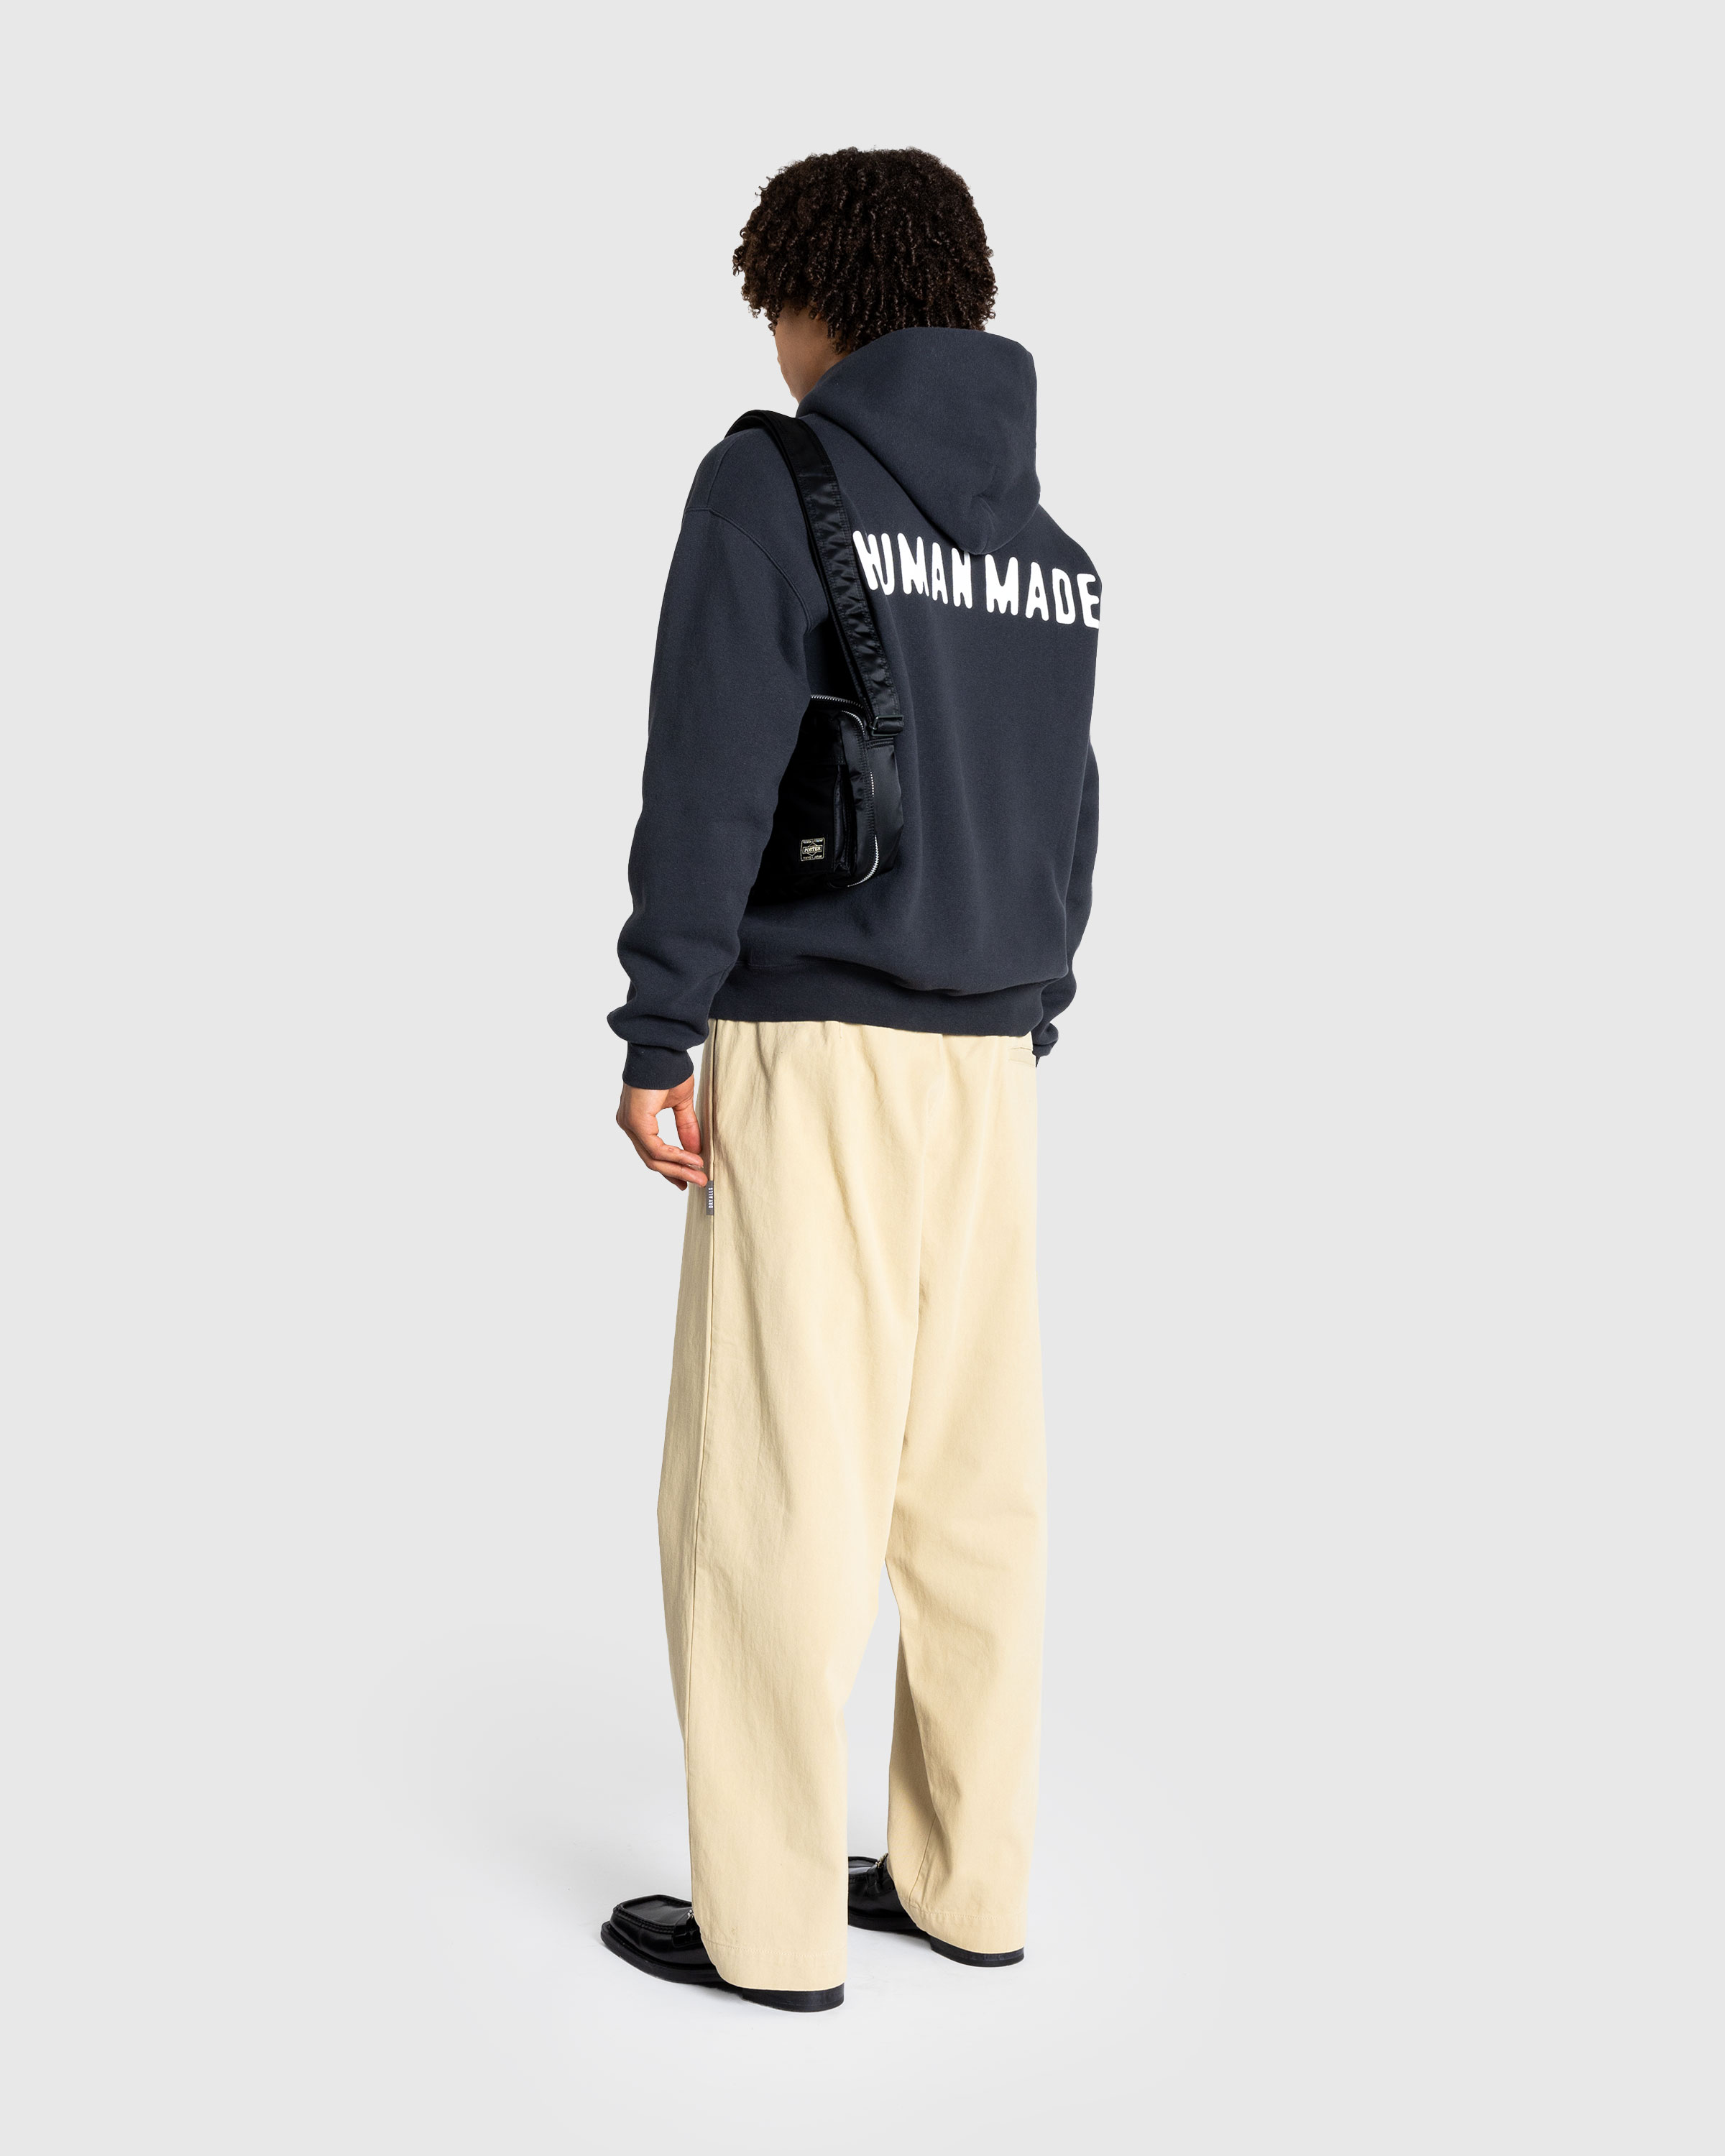 Human Made – Skater Pants Beige - Trousers - Beige - Image 4